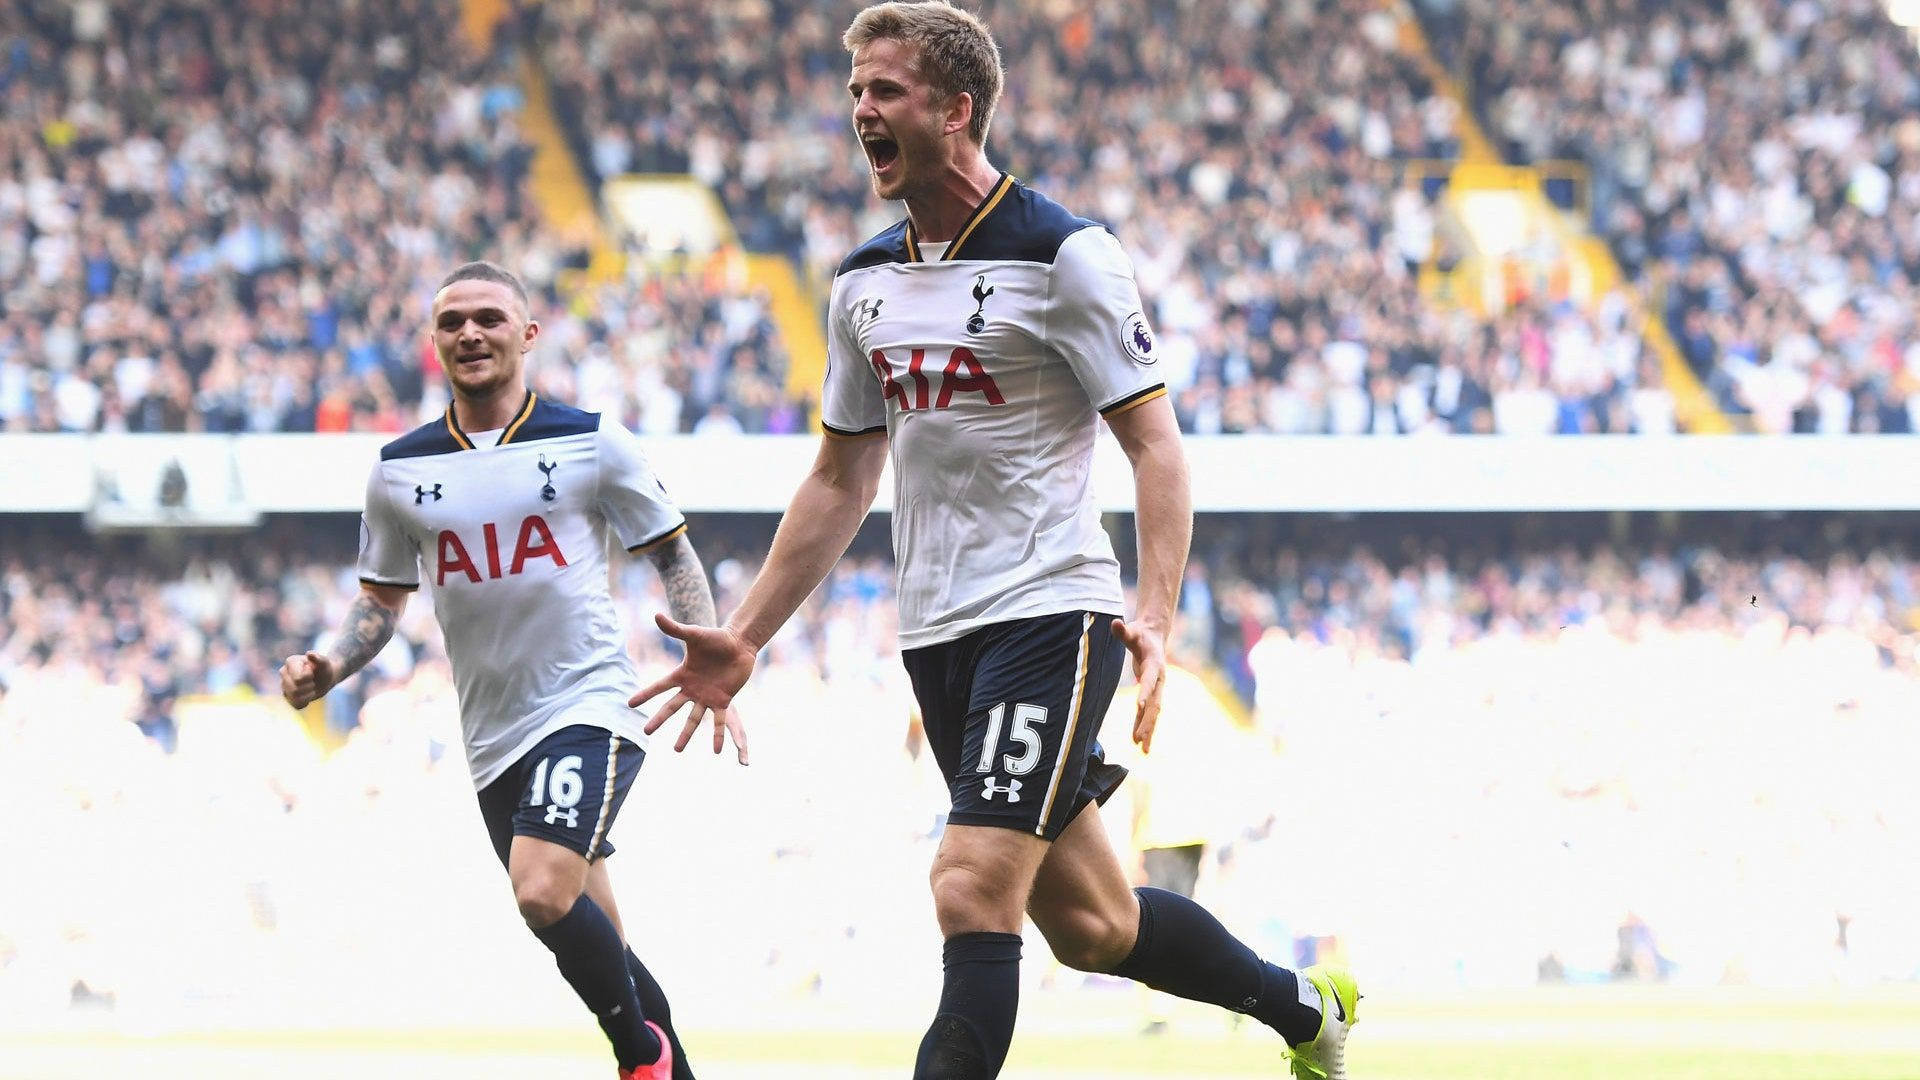 Ericdier Skriker Medan Han Går. (this Could Refer To A Wallpaper Image Featuring Eric Dier Shouting While Walking, Perhaps On A Football Field.) Wallpaper